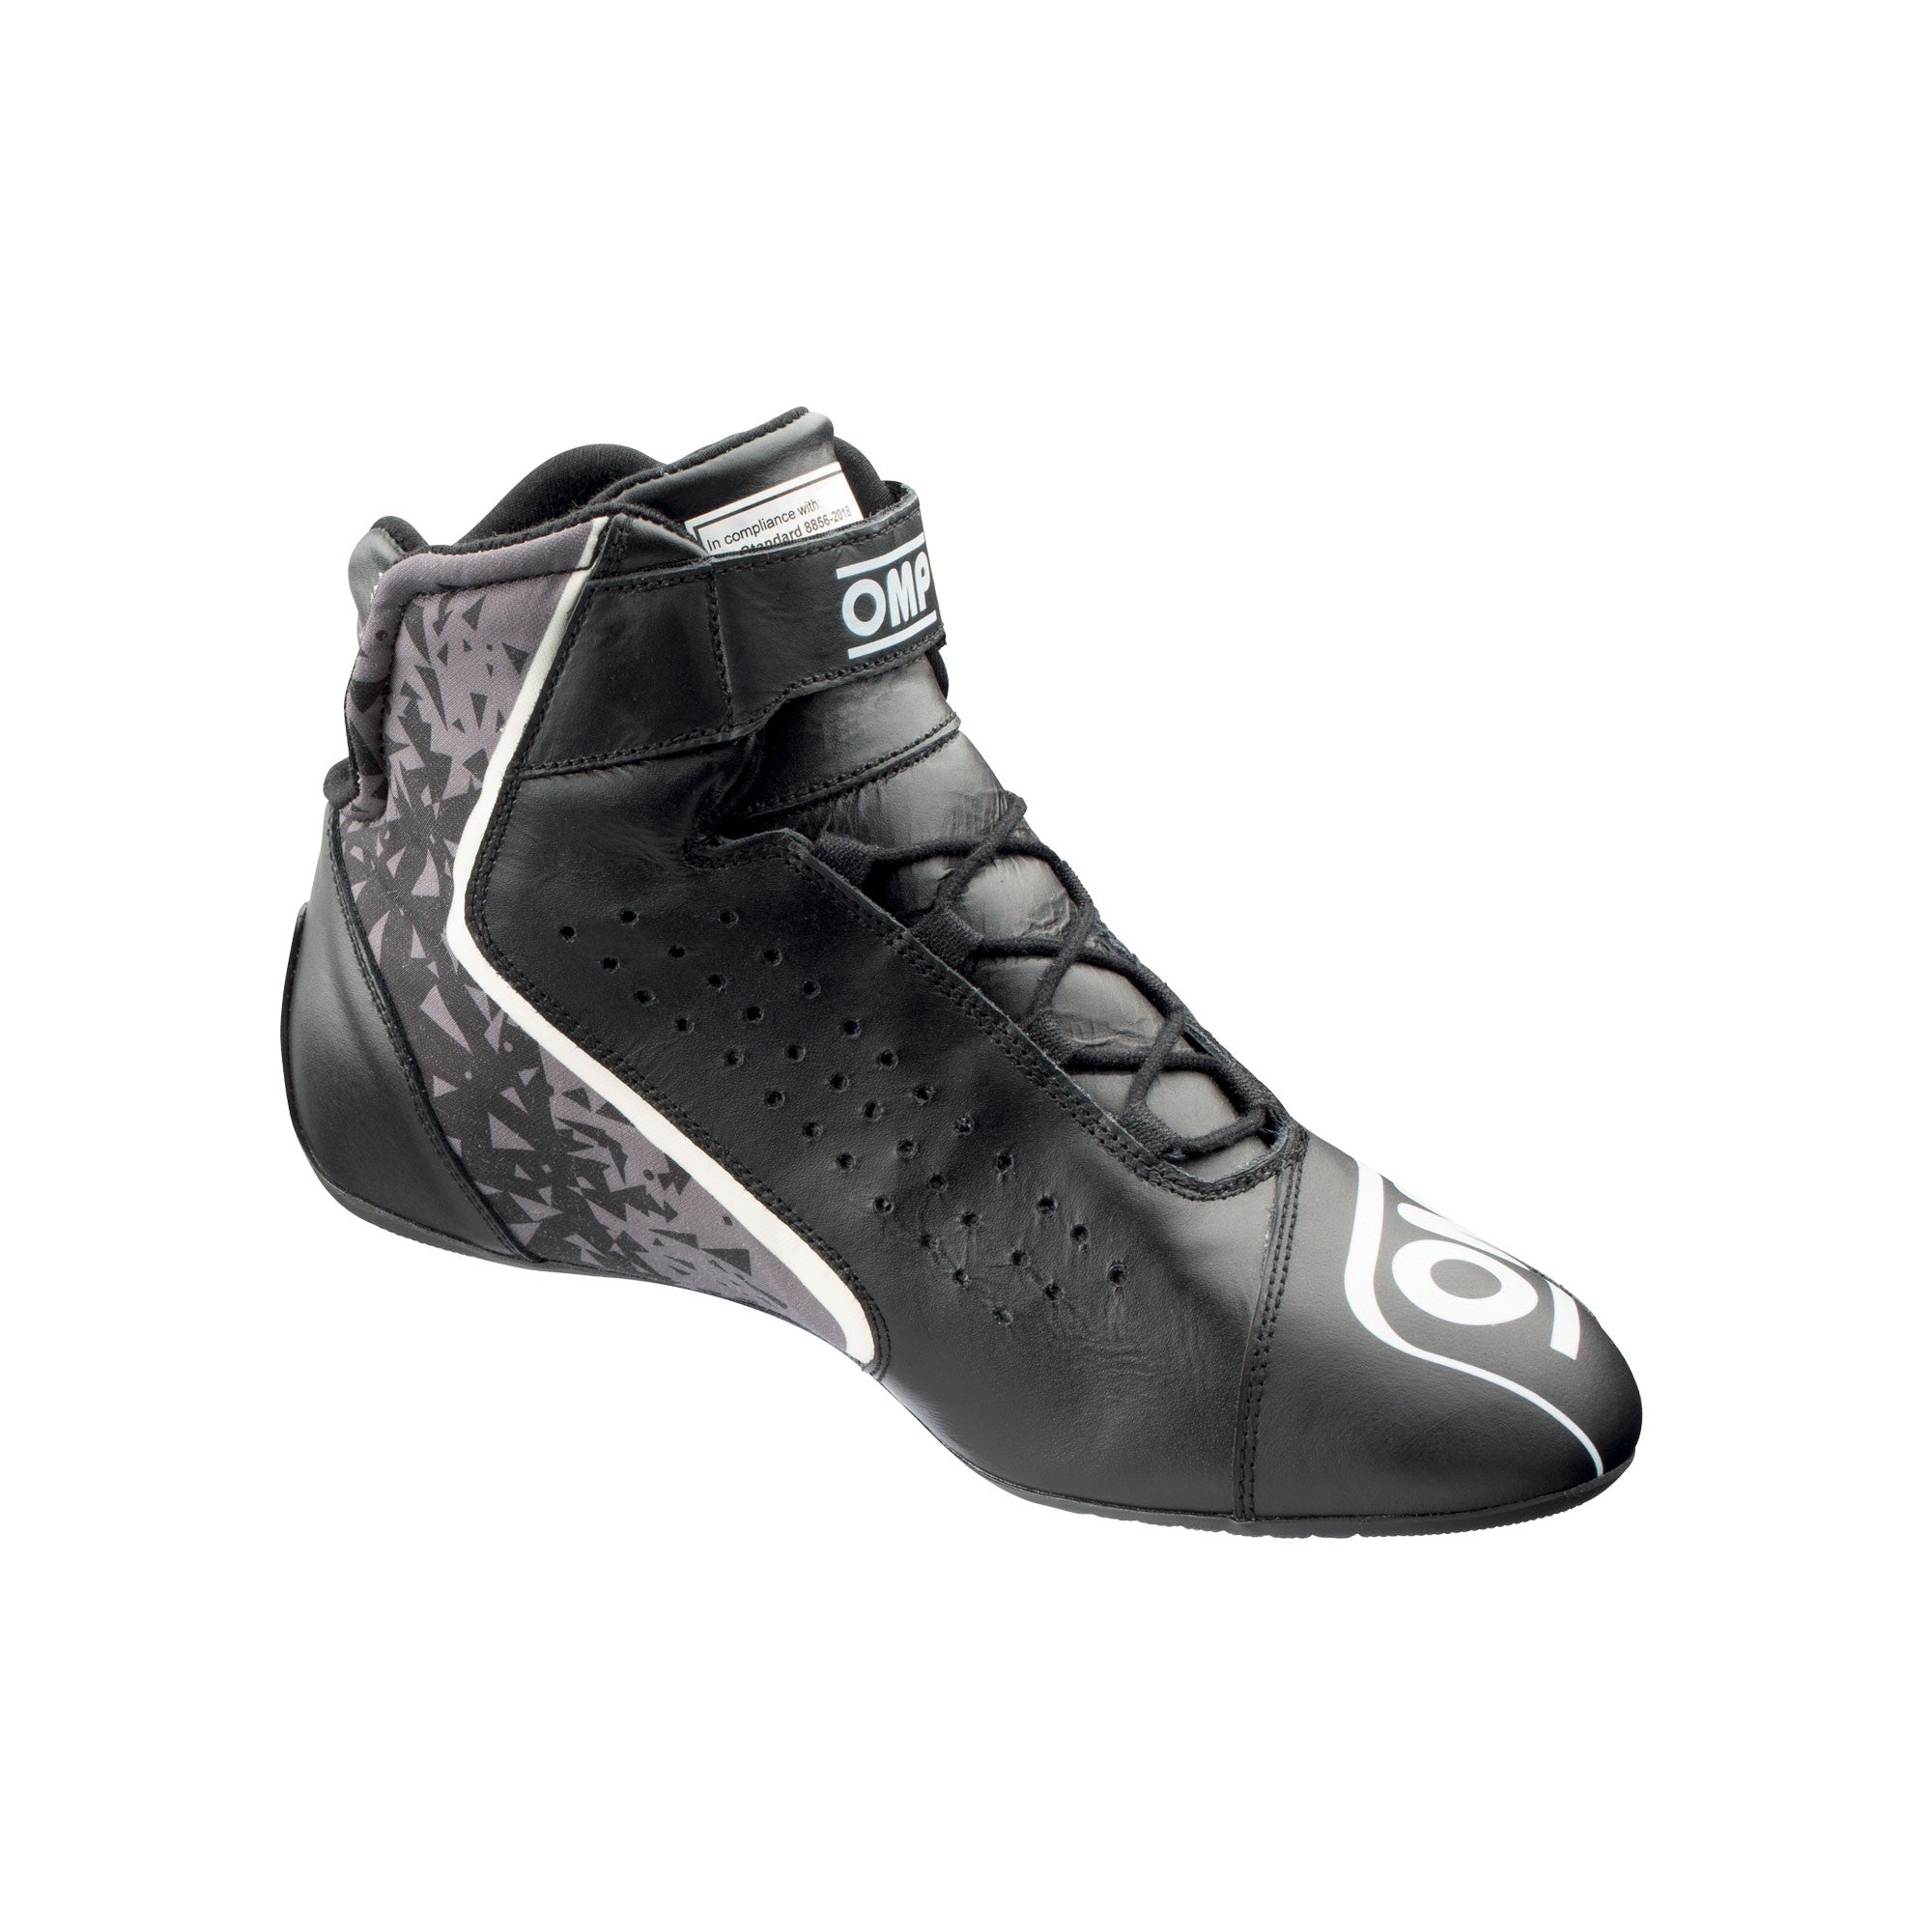 OMP One Evo X Shoes, 4 Color Options, Size: 36 - 48